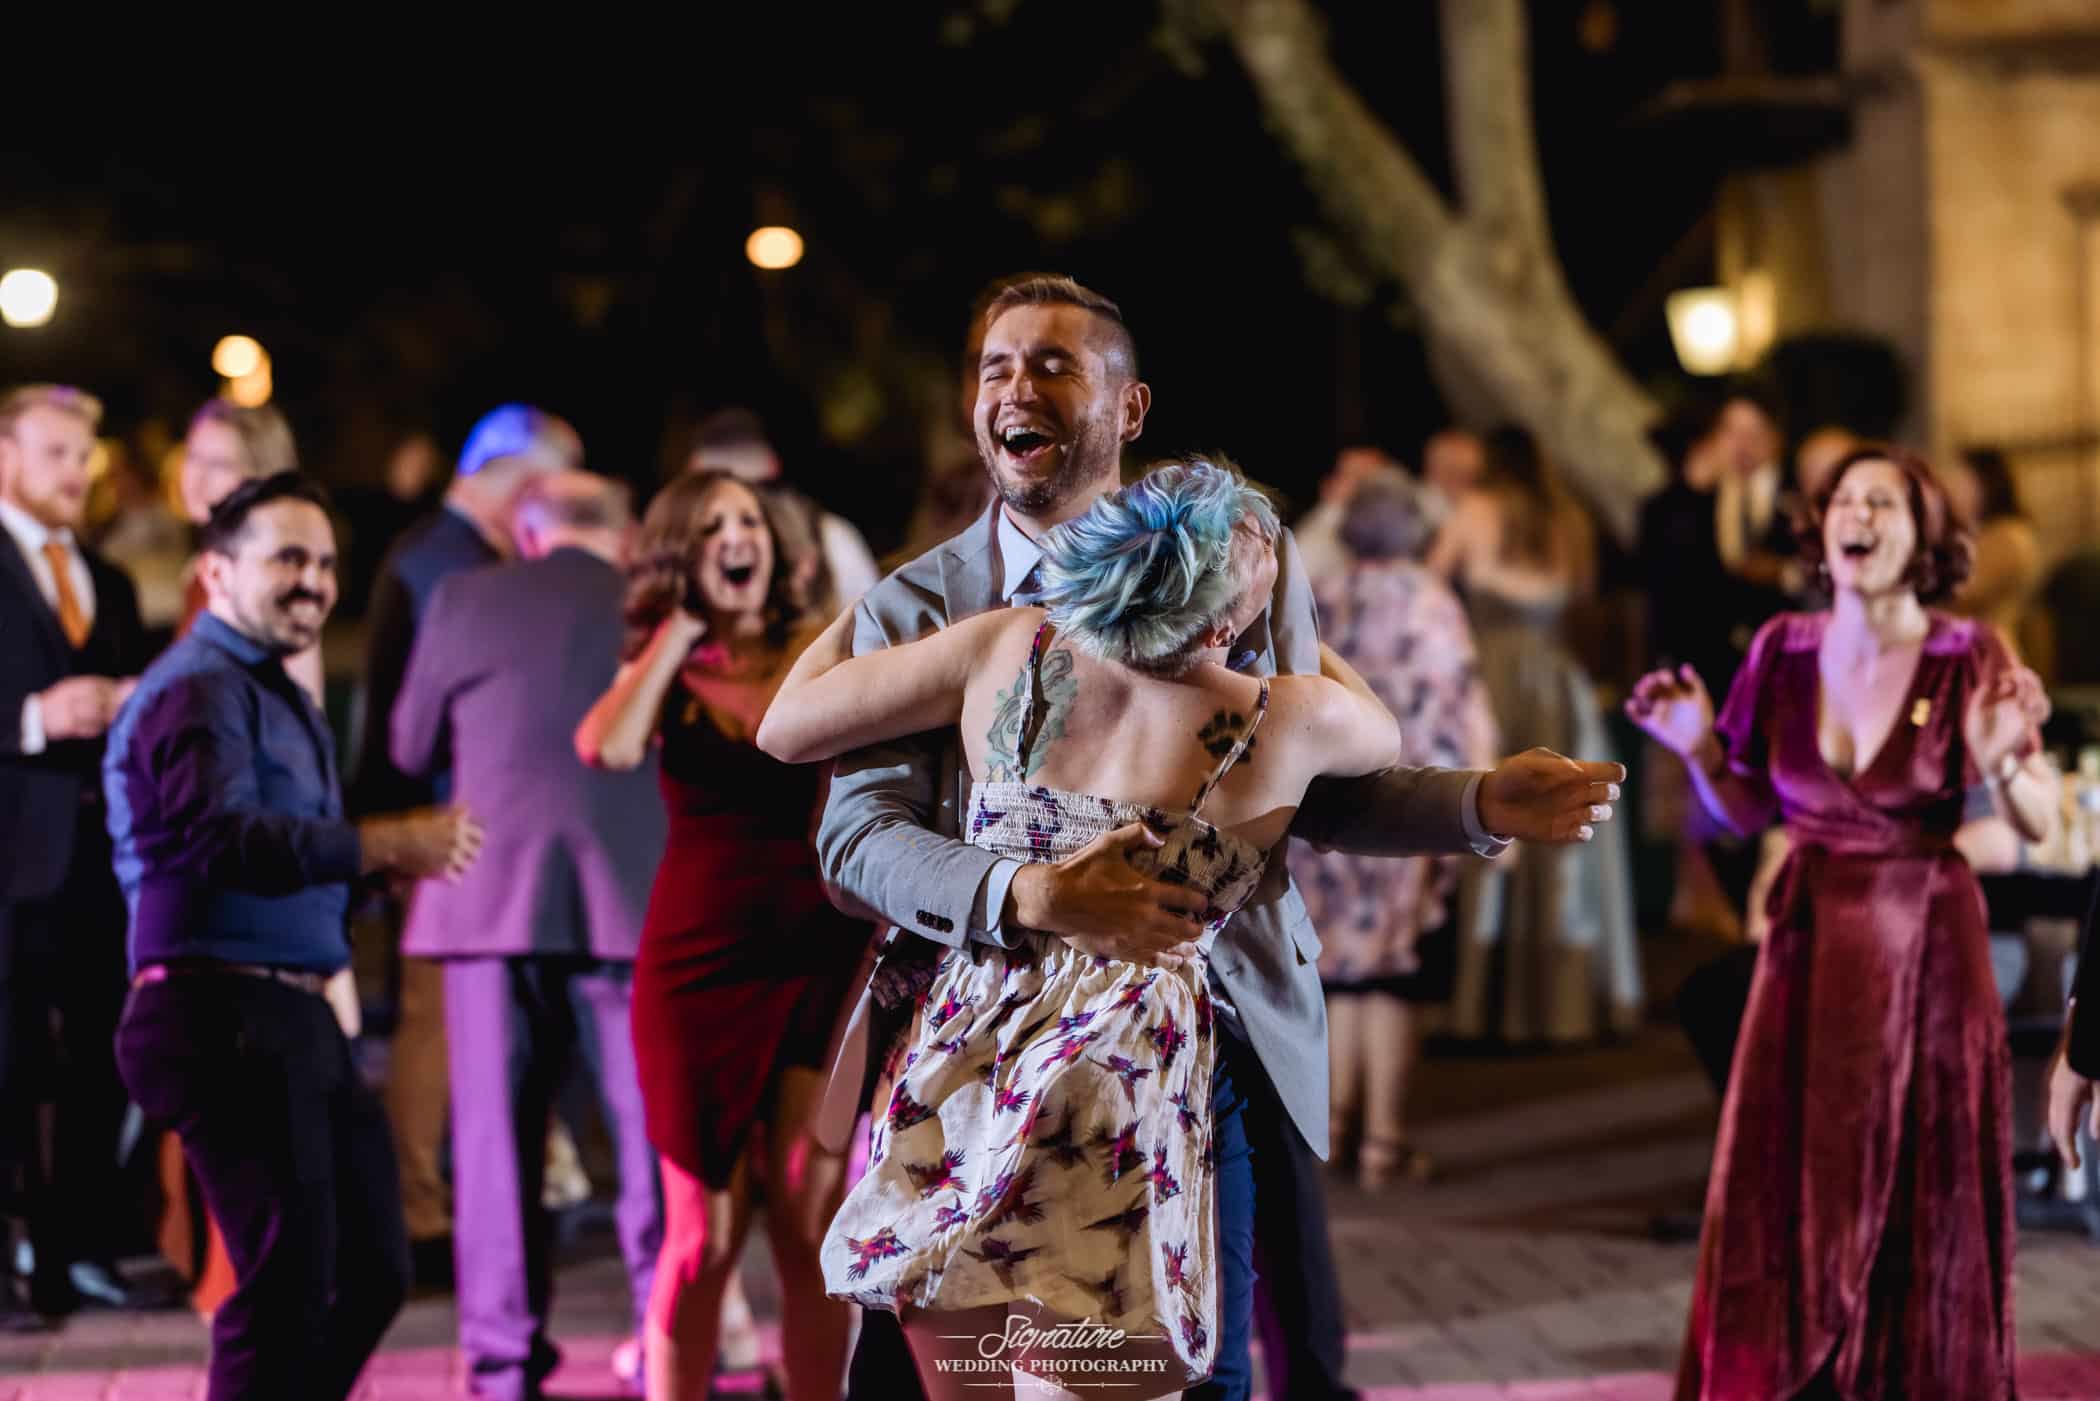 Wedding guests dancing together at reception